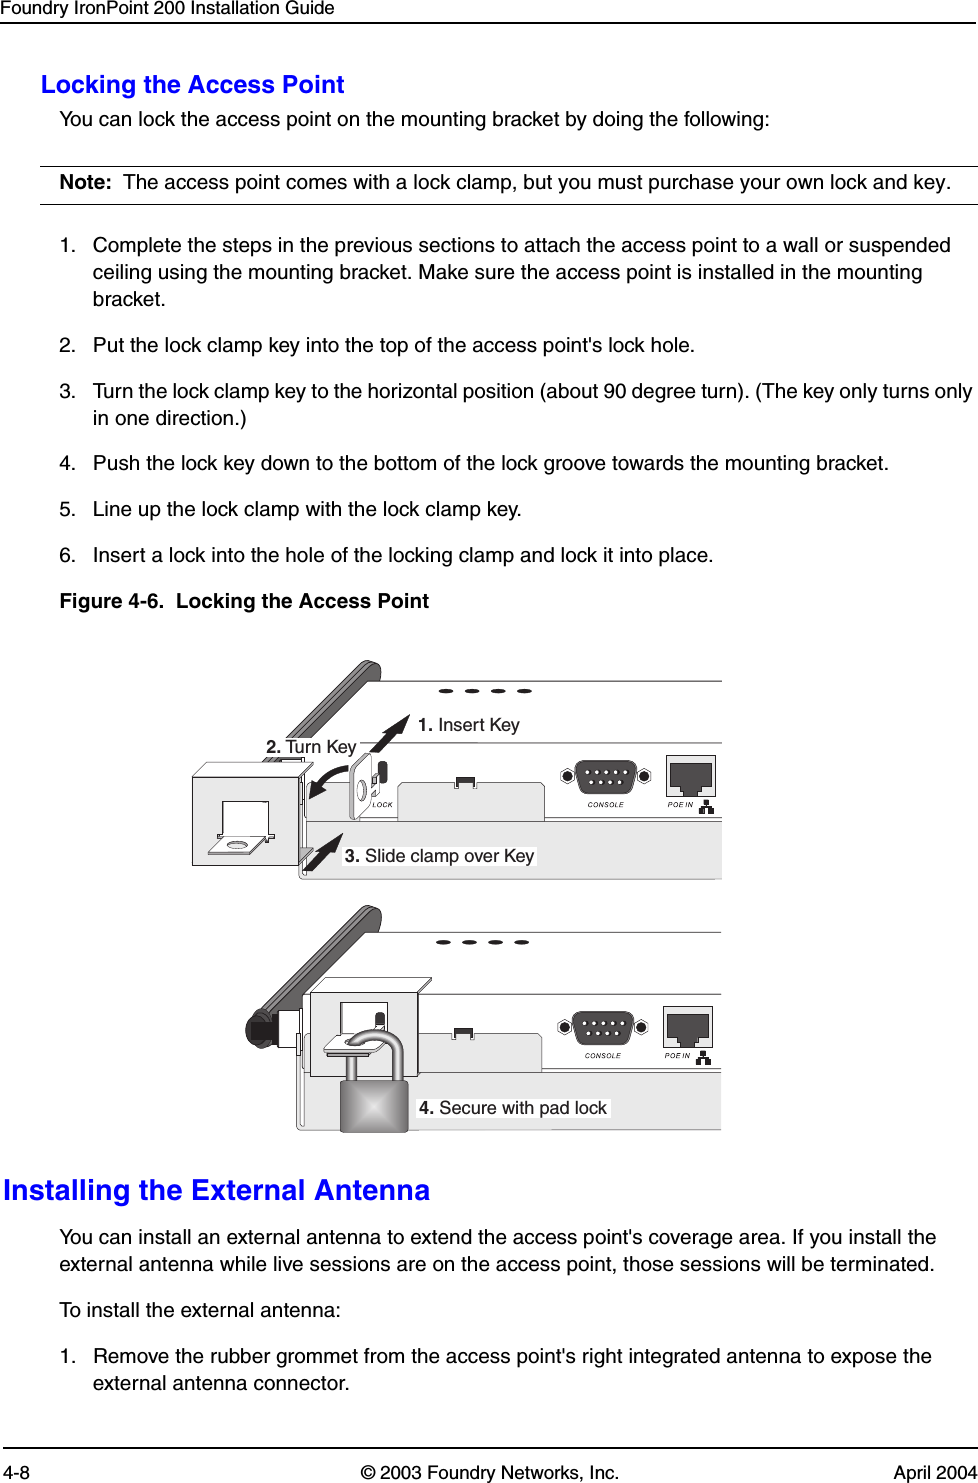 Foundry IronPoint 200 Installation Guide4-8 © 2003 Foundry Networks, Inc. April 2004Locking the Access PointYou can lock the access point on the mounting bracket by doing the following:Note: The access point comes with a lock clamp, but you must purchase your own lock and key.1. Complete the steps in the previous sections to attach the access point to a wall or suspended ceiling using the mounting bracket. Make sure the access point is installed in the mounting bracket.2. Put the lock clamp key into the top of the access point&apos;s lock hole.3. Turn the lock clamp key to the horizontal position (about 90 degree turn). (The key only turns only in one direction.)4. Push the lock key down to the bottom of the lock groove towards the mounting bracket.5. Line up the lock clamp with the lock clamp key.6. Insert a lock into the hole of the locking clamp and lock it into place.Figure 4-6.  Locking the Access PointInstalling the External AntennaYou can install an external antenna to extend the access point&apos;s coverage area. If you install the external antenna while live sessions are on the access point, those sessions will be terminated.To install the external antenna:1. Remove the rubber grommet from the access point&apos;s right integrated antenna to expose the external antenna connector.1. Insert Key2. Tur n Key3. Slide clamp over Key4. Secure with pad lock